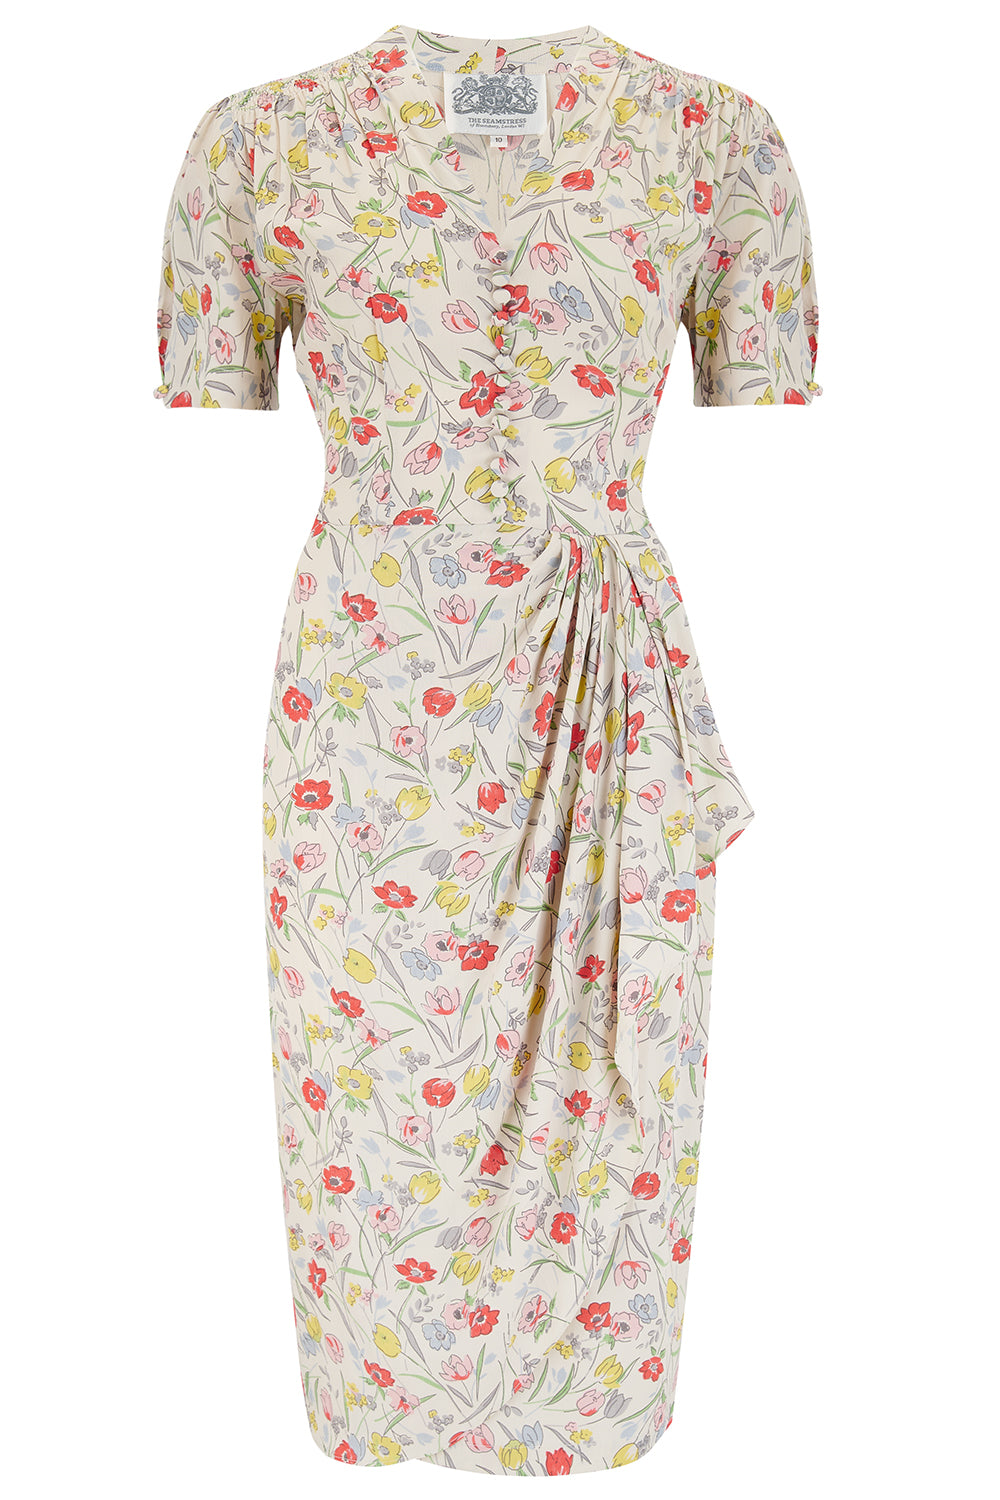 "Mabel" Dress in Poppy Print, A Classic 1940s Inspired Vintage Style - CC41, Goodwood Revival, Twinwood Festival, Viva Las Vegas Rockabilly Weekend Rock n Romance The Seamstress of Bloomsbury